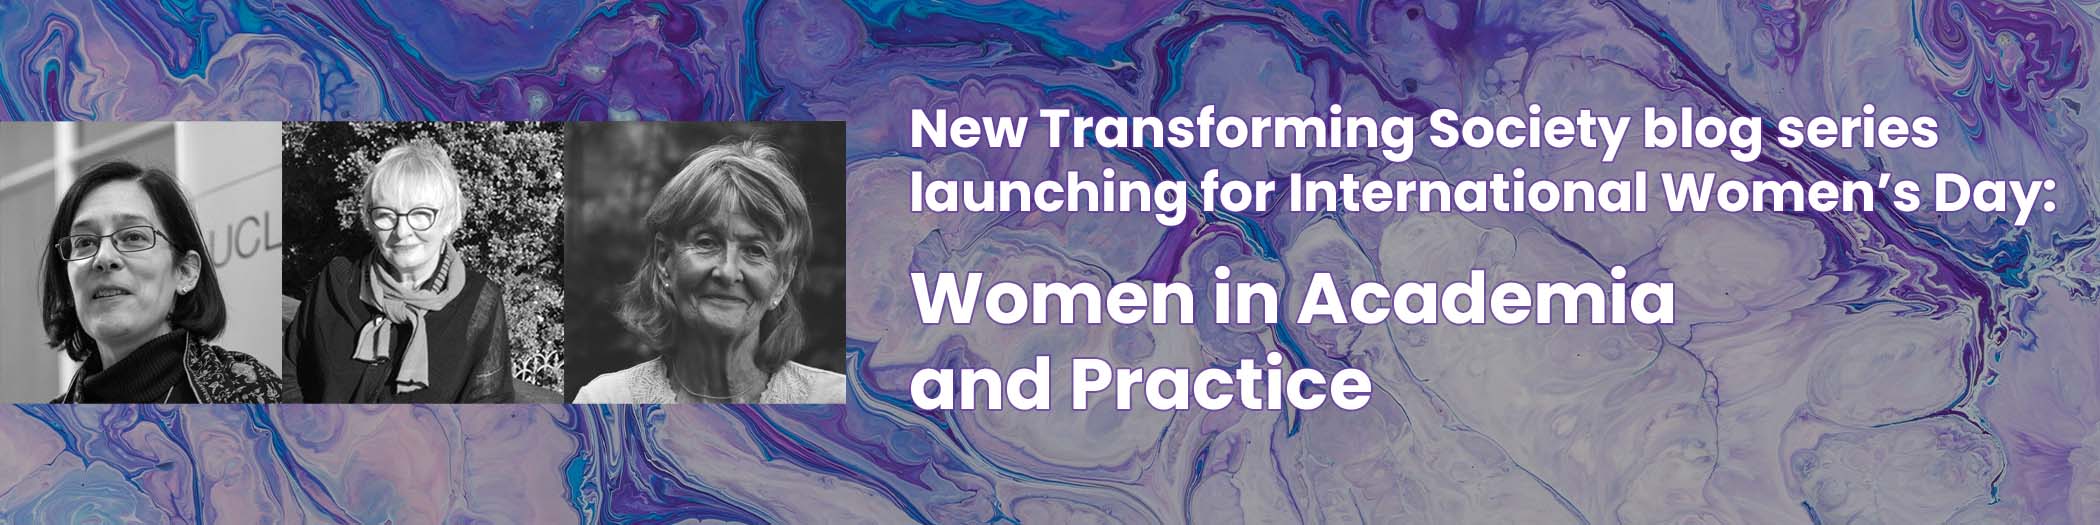 Women in Academia and Practice Transforming Society series